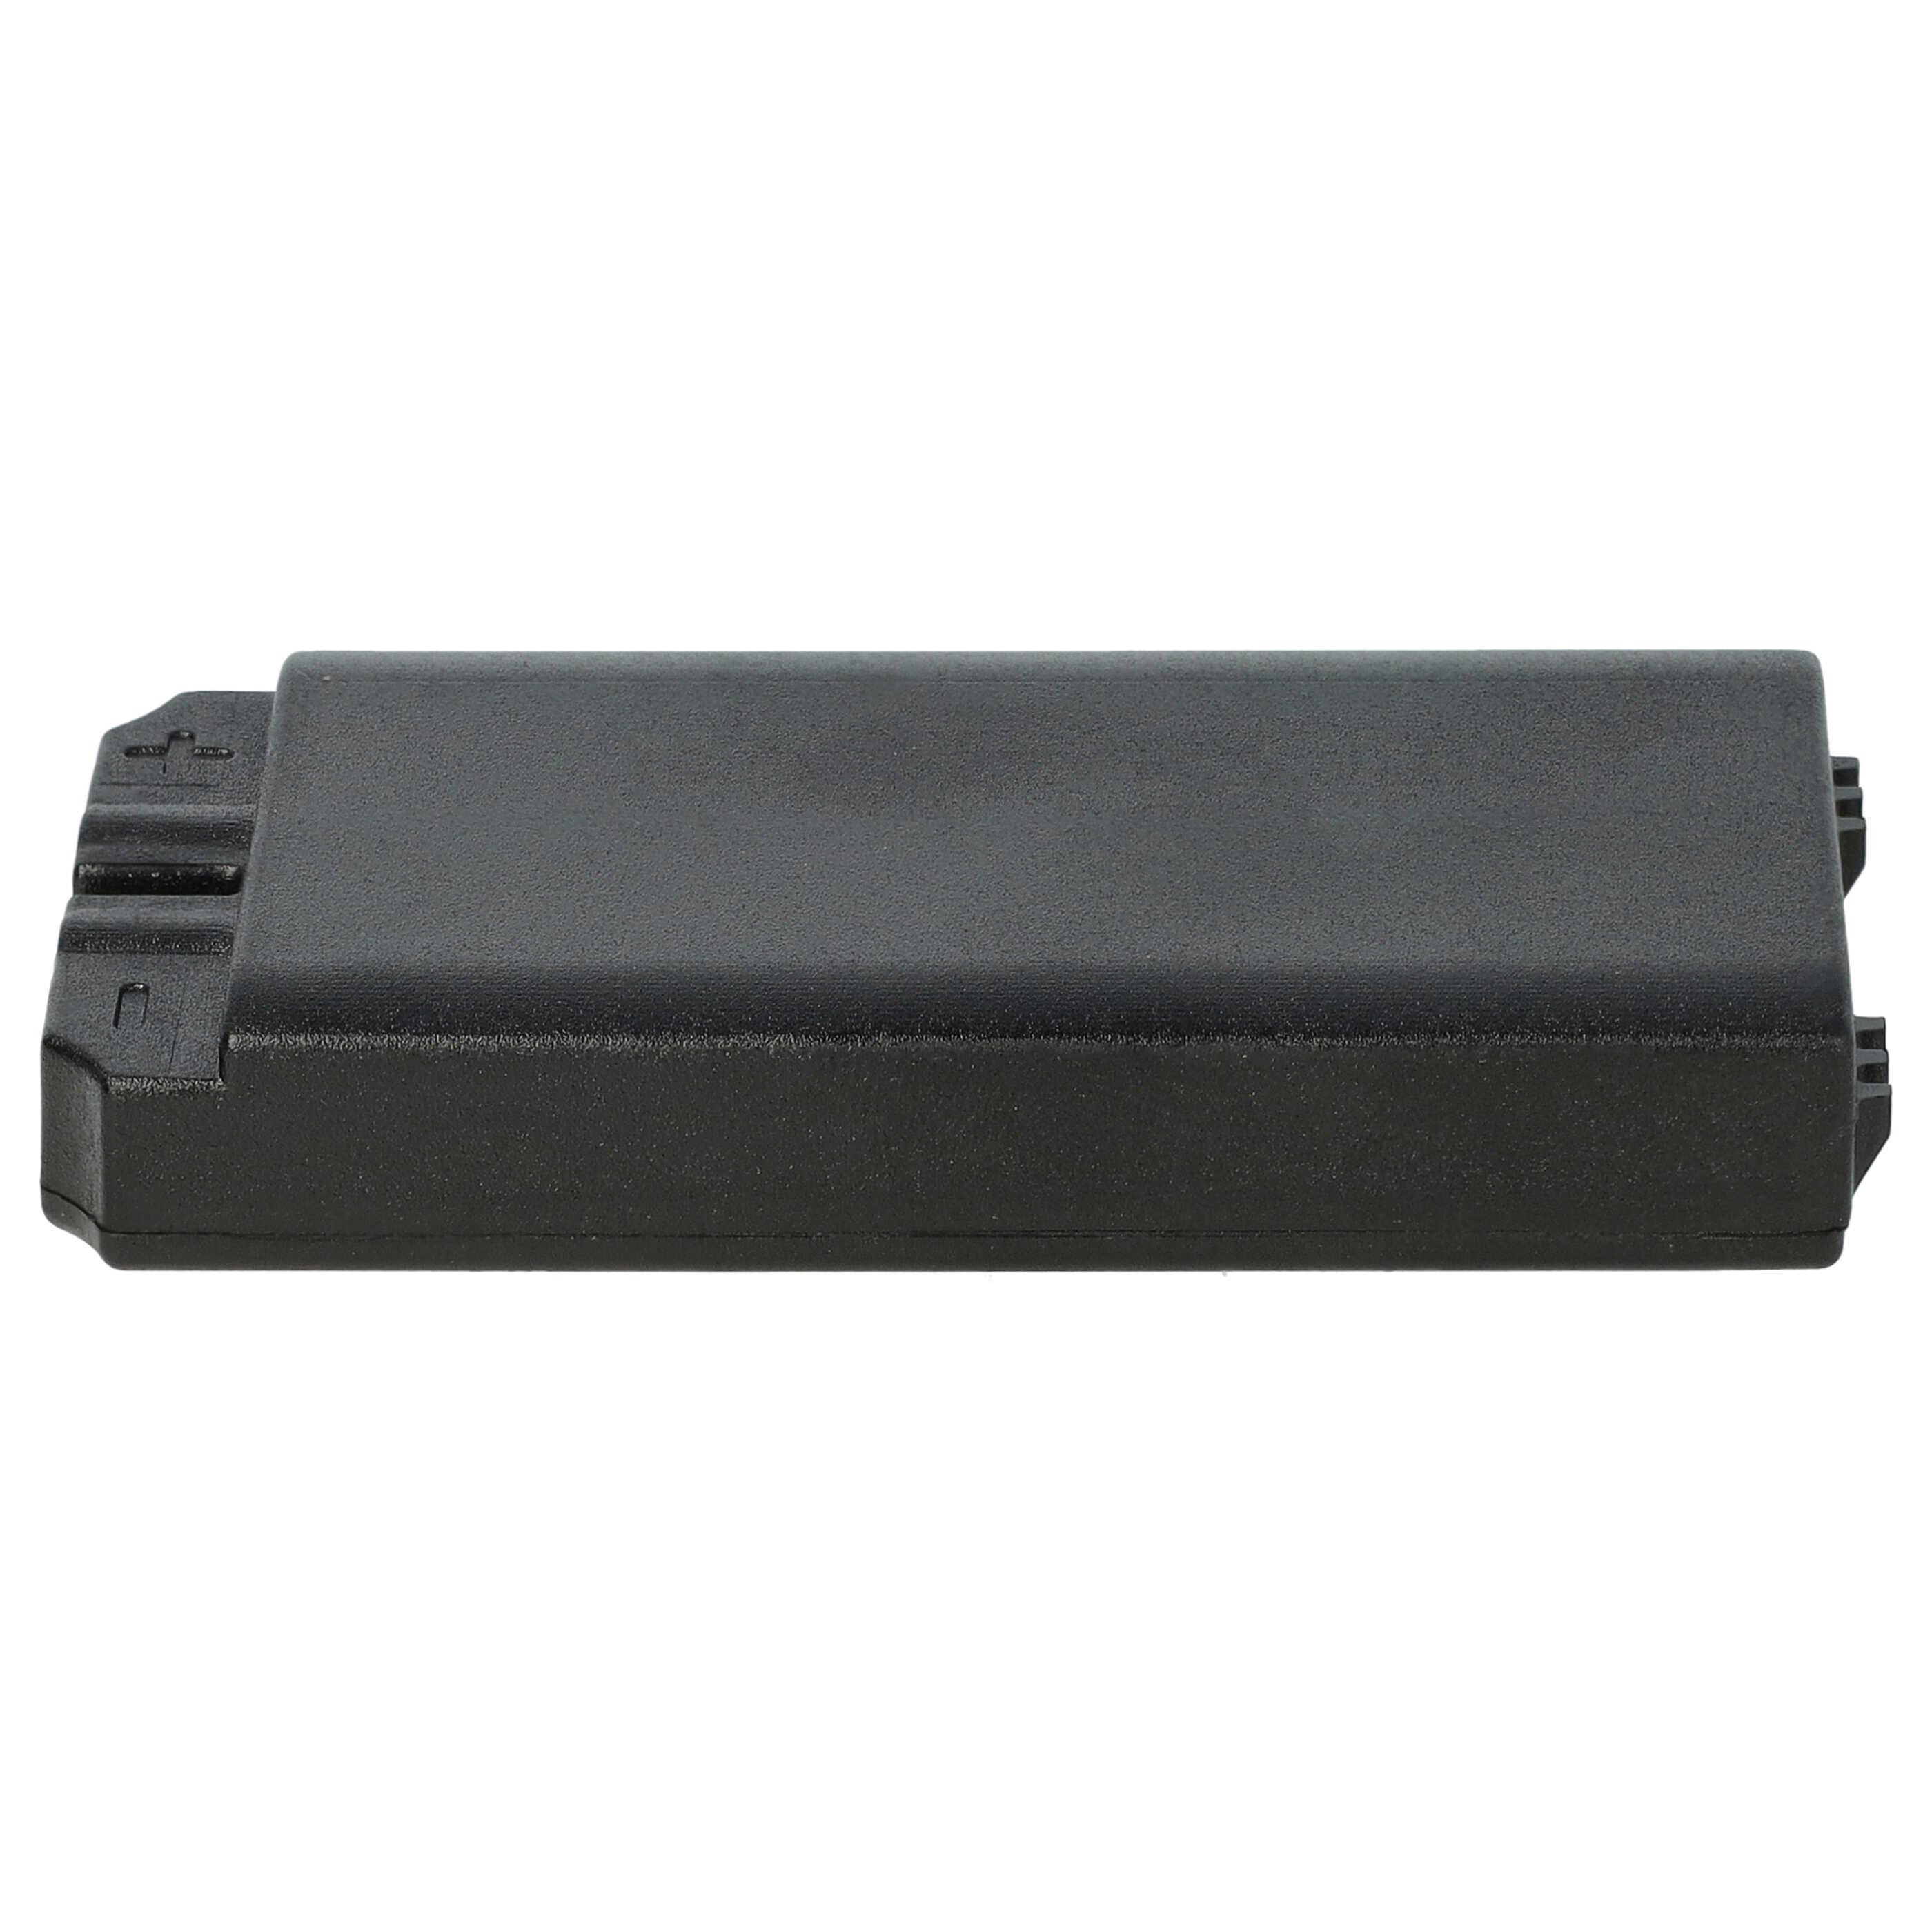 Industrial Remote Control Battery Replacement for Danfoss BT11K - 1100mAh 3.7V Li-Ion